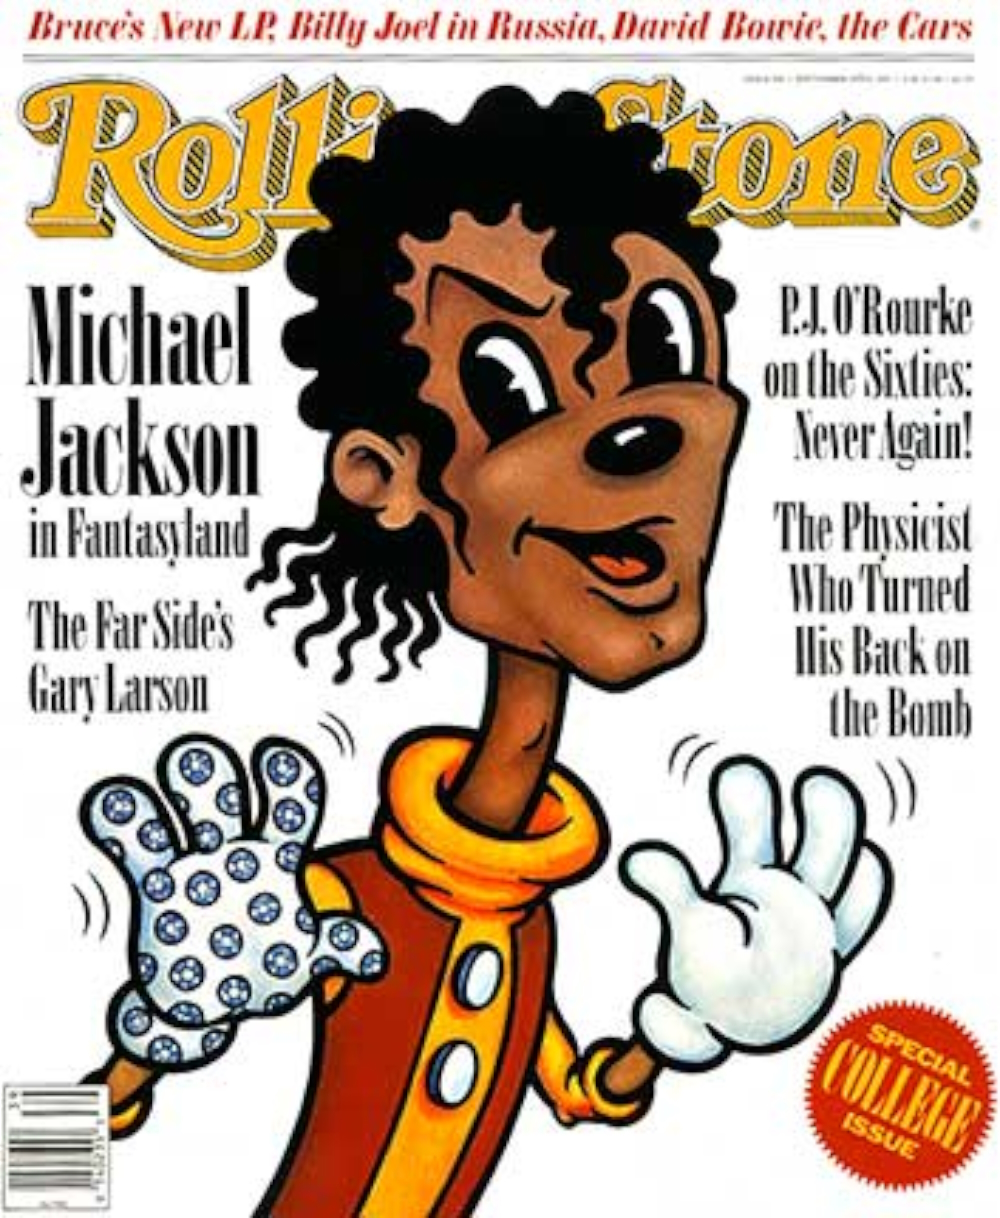 Cover of Rolling Stone: 'Michael Jackson in Fantasyland'.